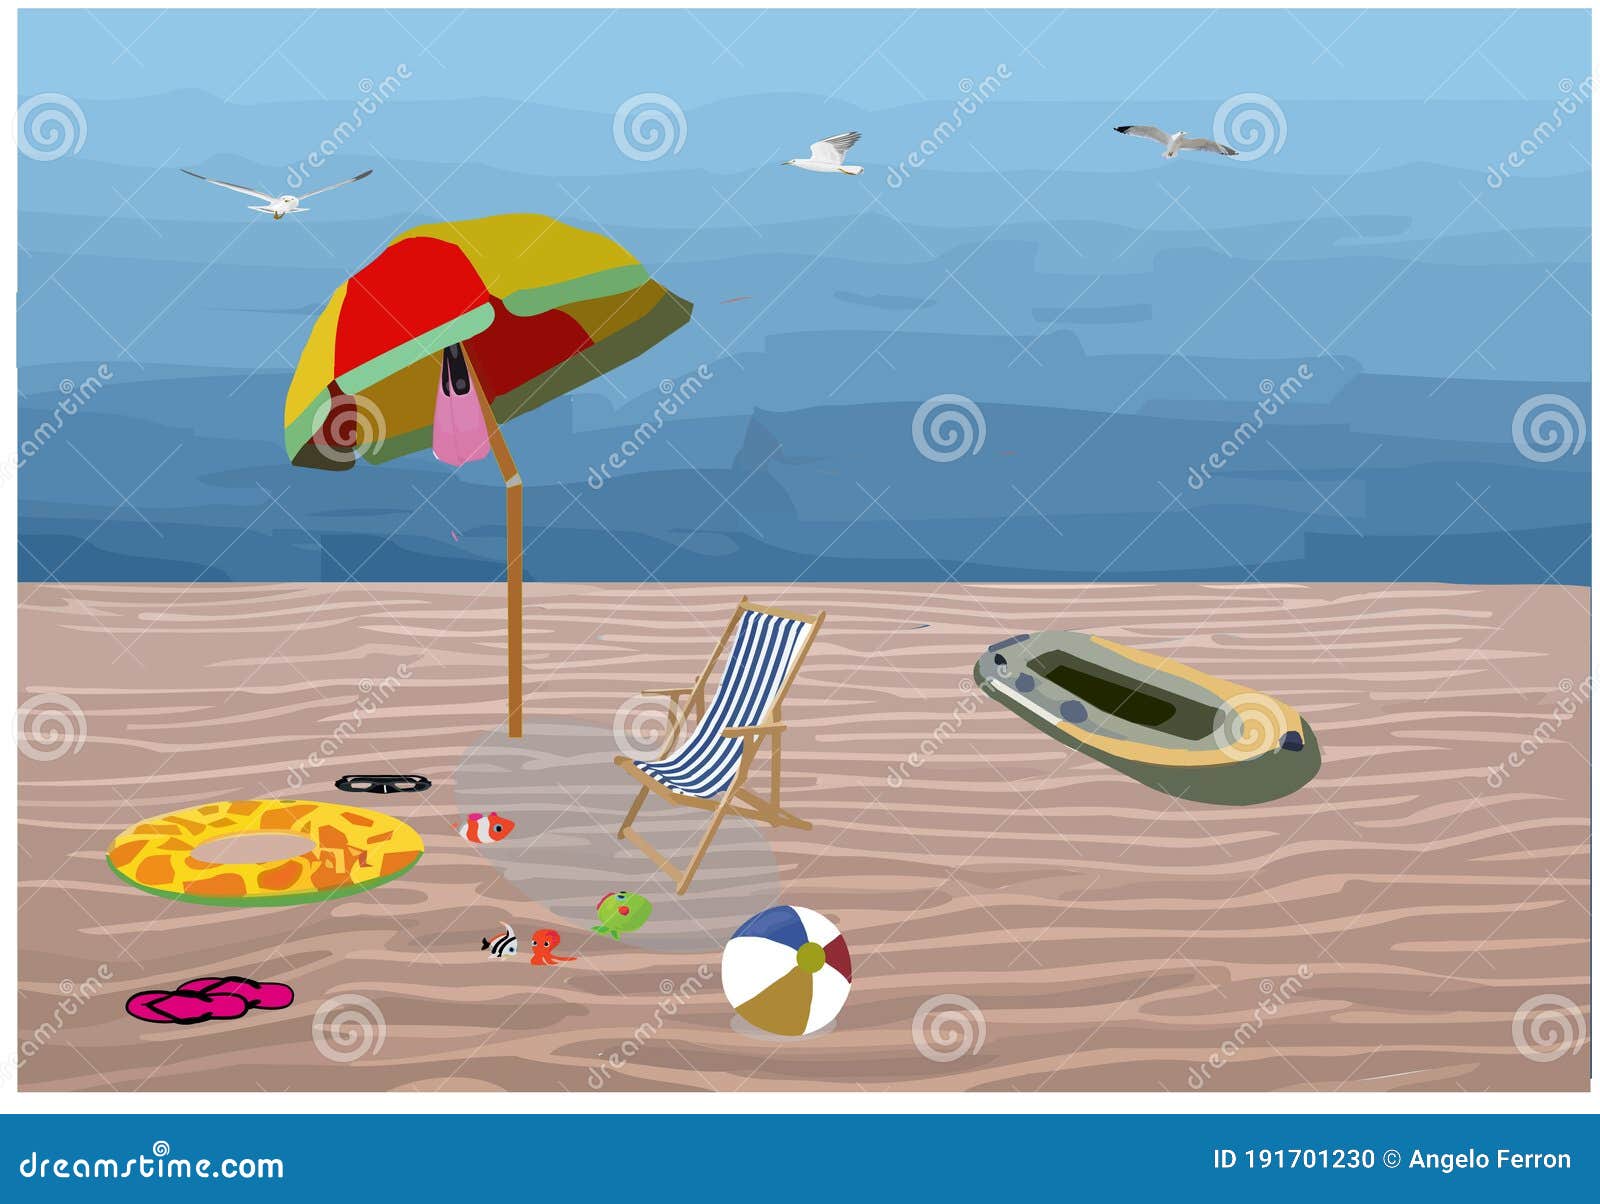 beach sea relax abandoned games beach sea relax abandoned games